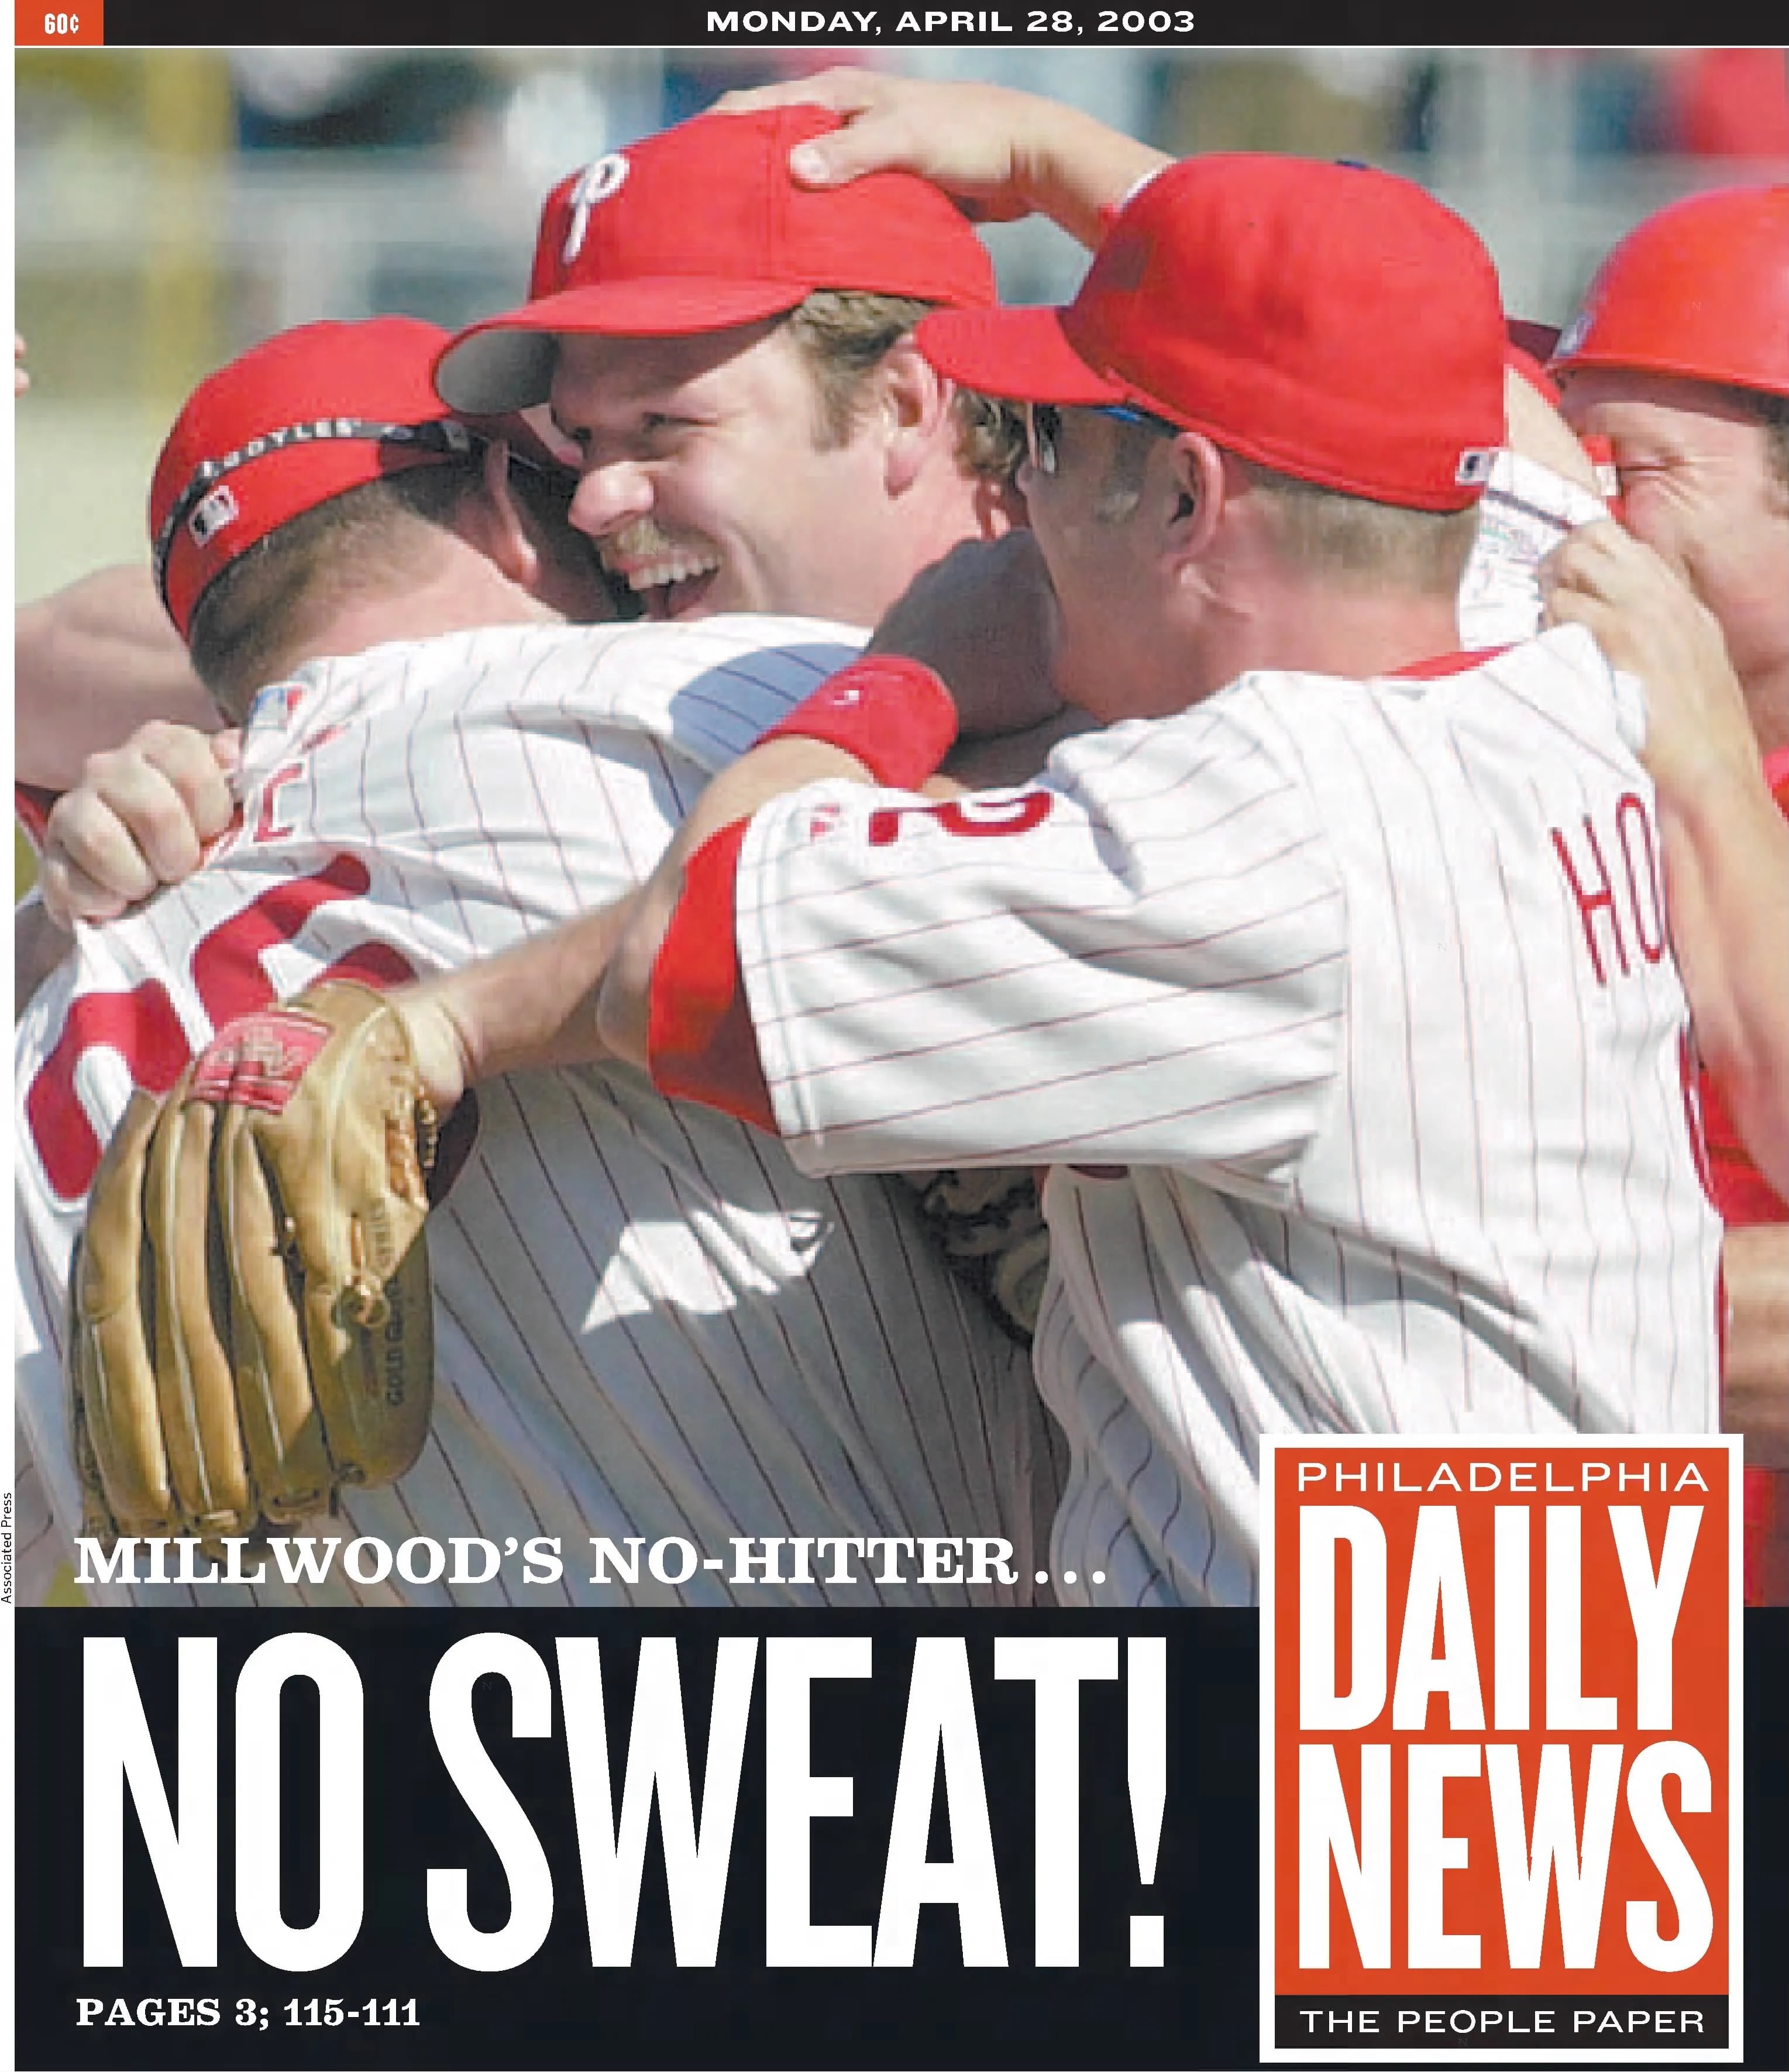 On April 27, 2003, Kevin Millwood threw the second no-hitter in Veterans Stadium history.